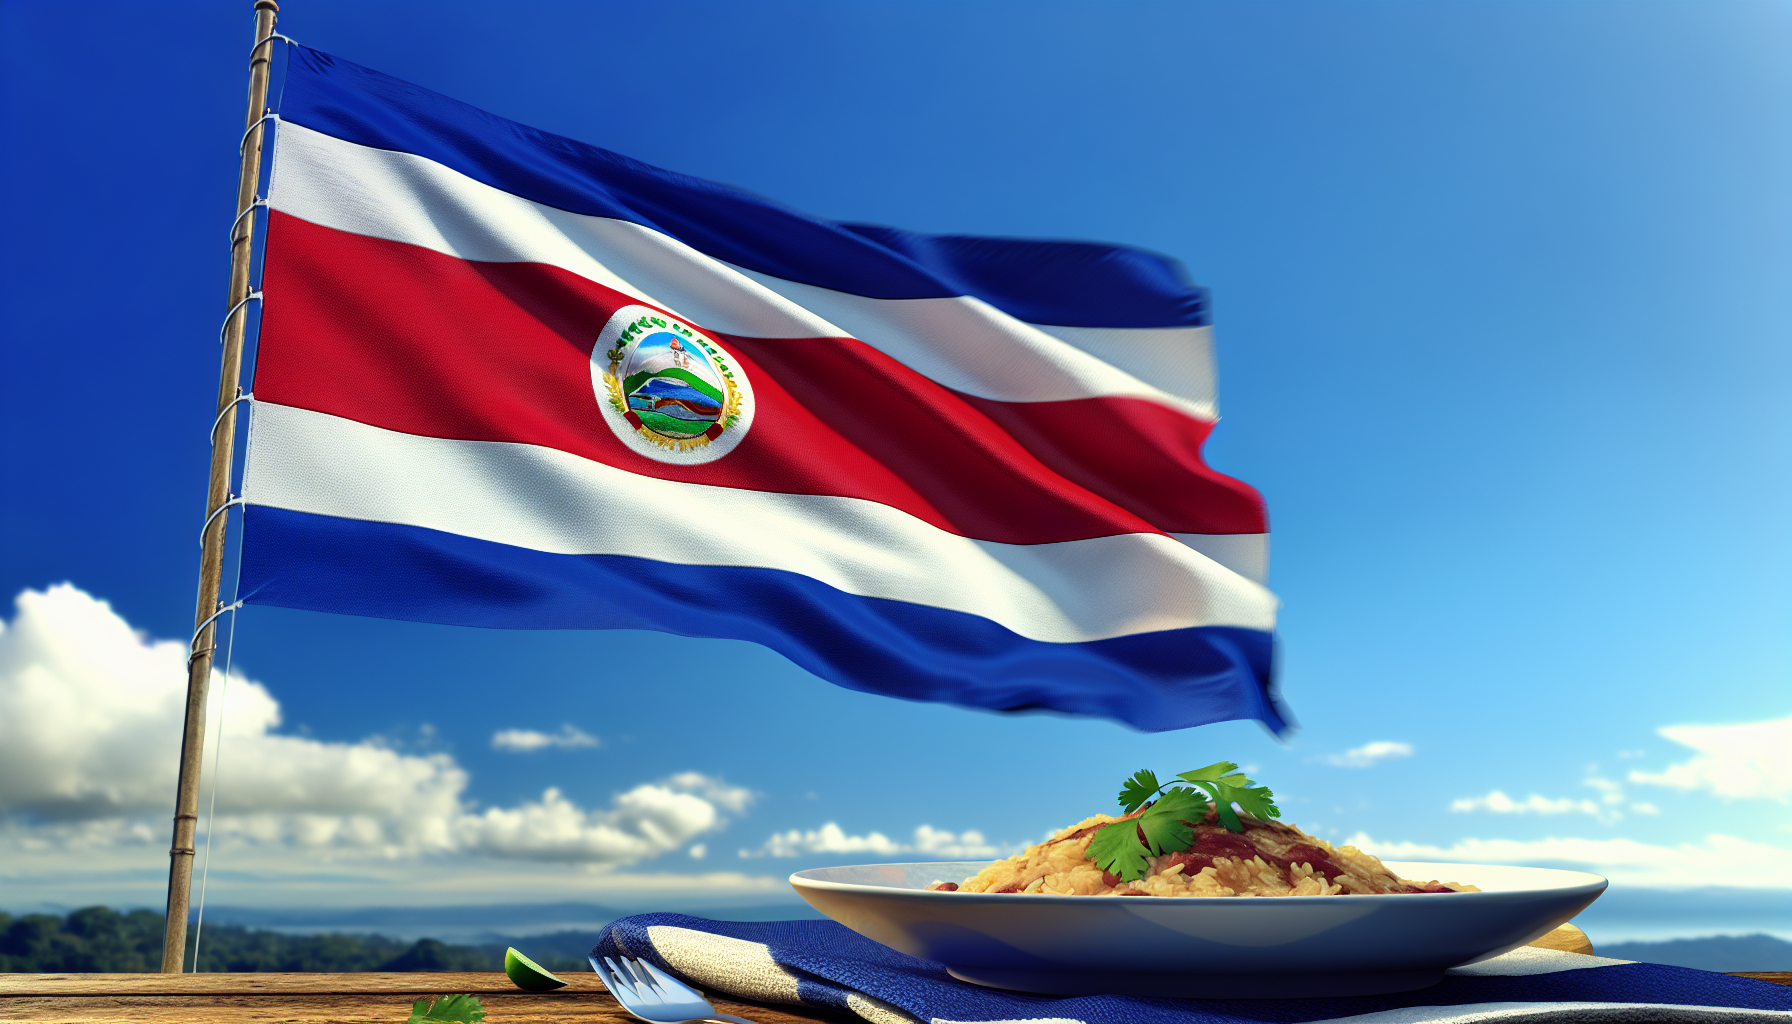 Costa Rican flag waving in the wind